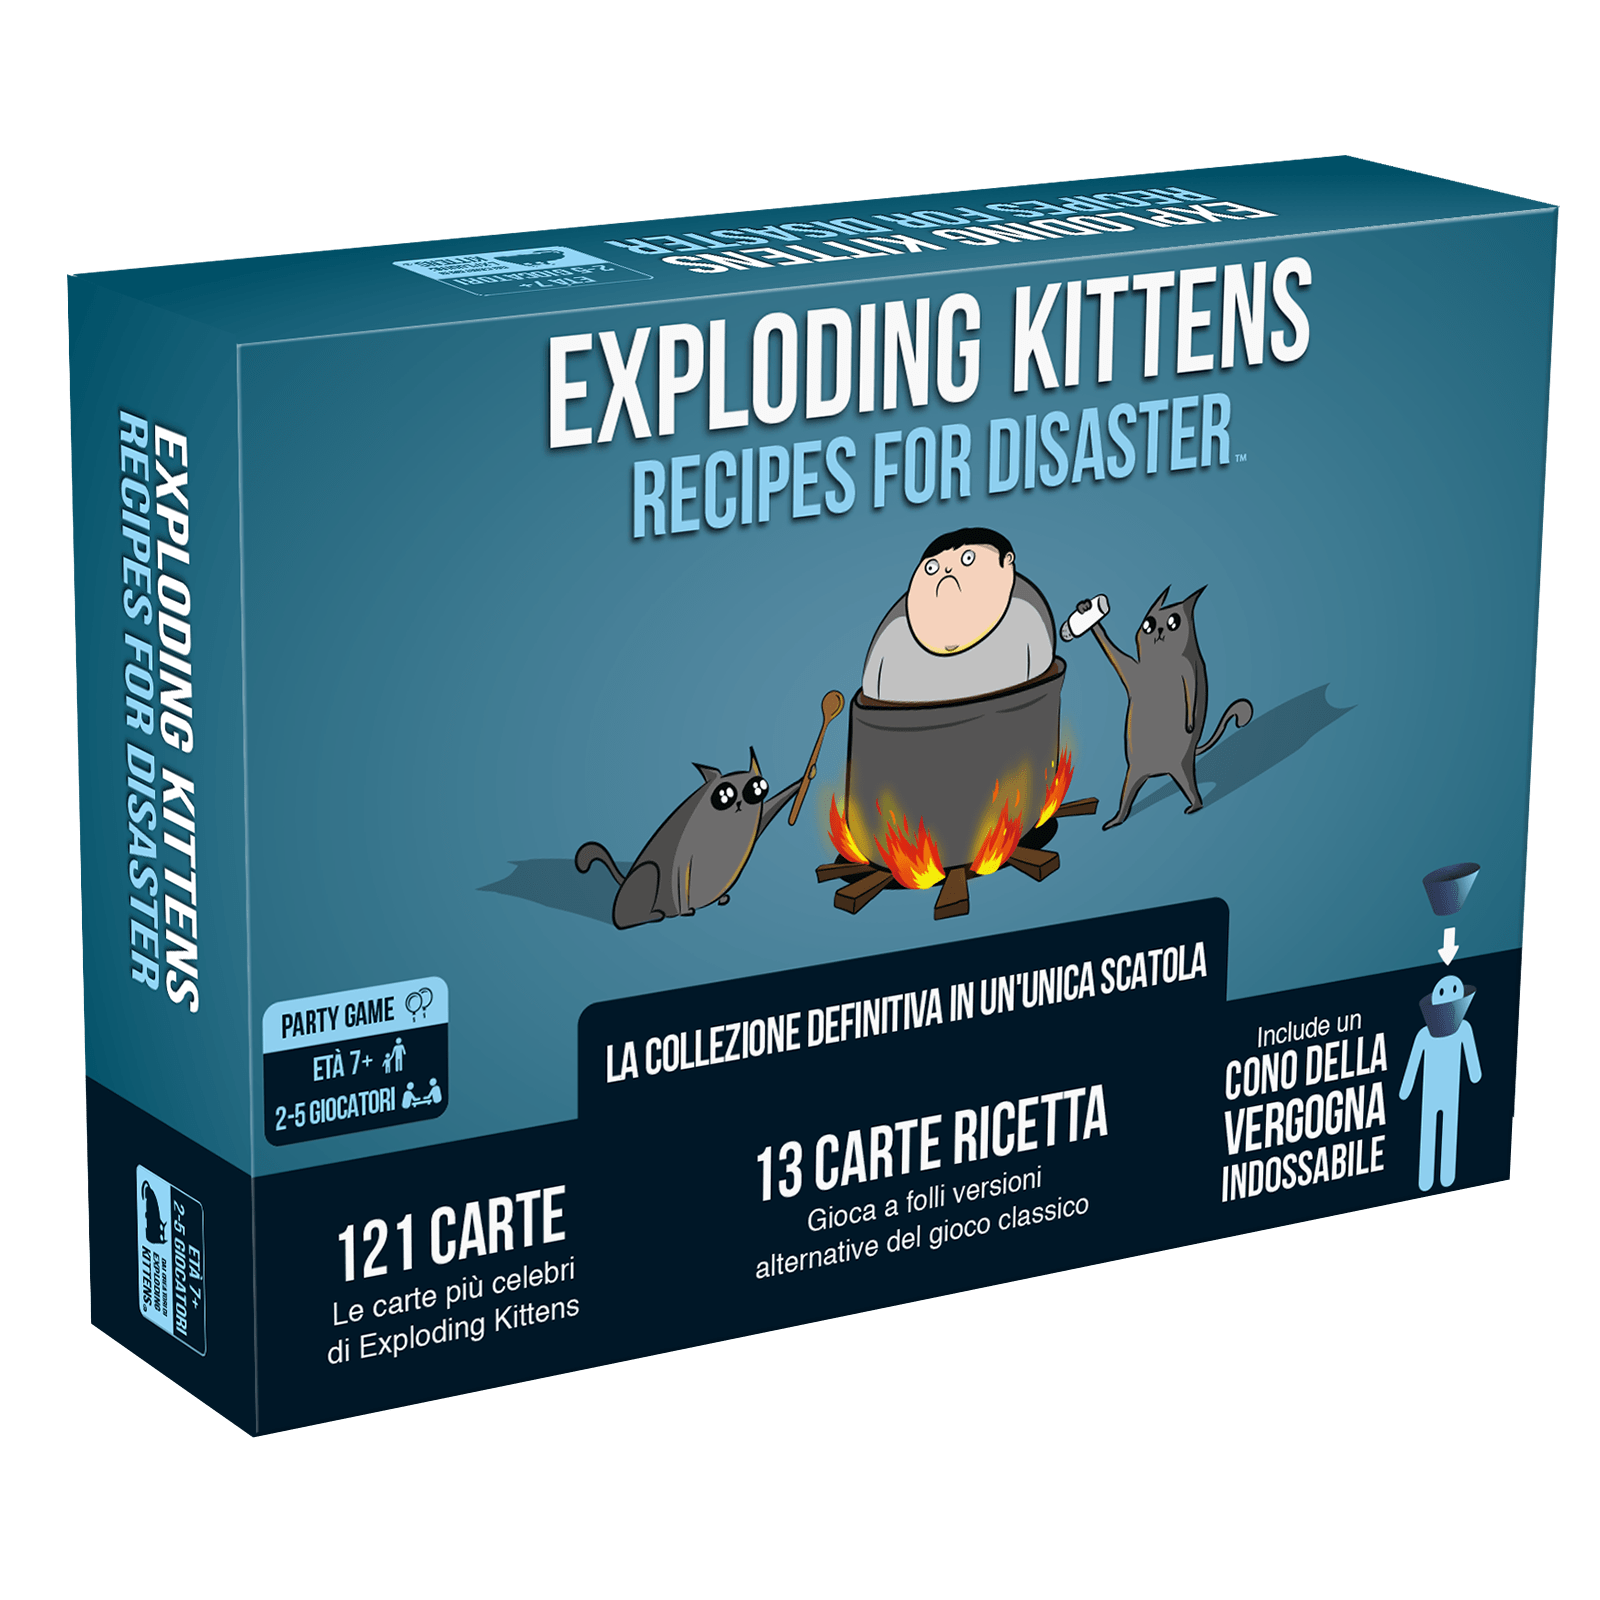 Exploding Kittens - Recipes for Disaster Board Game - Asmodee Italia